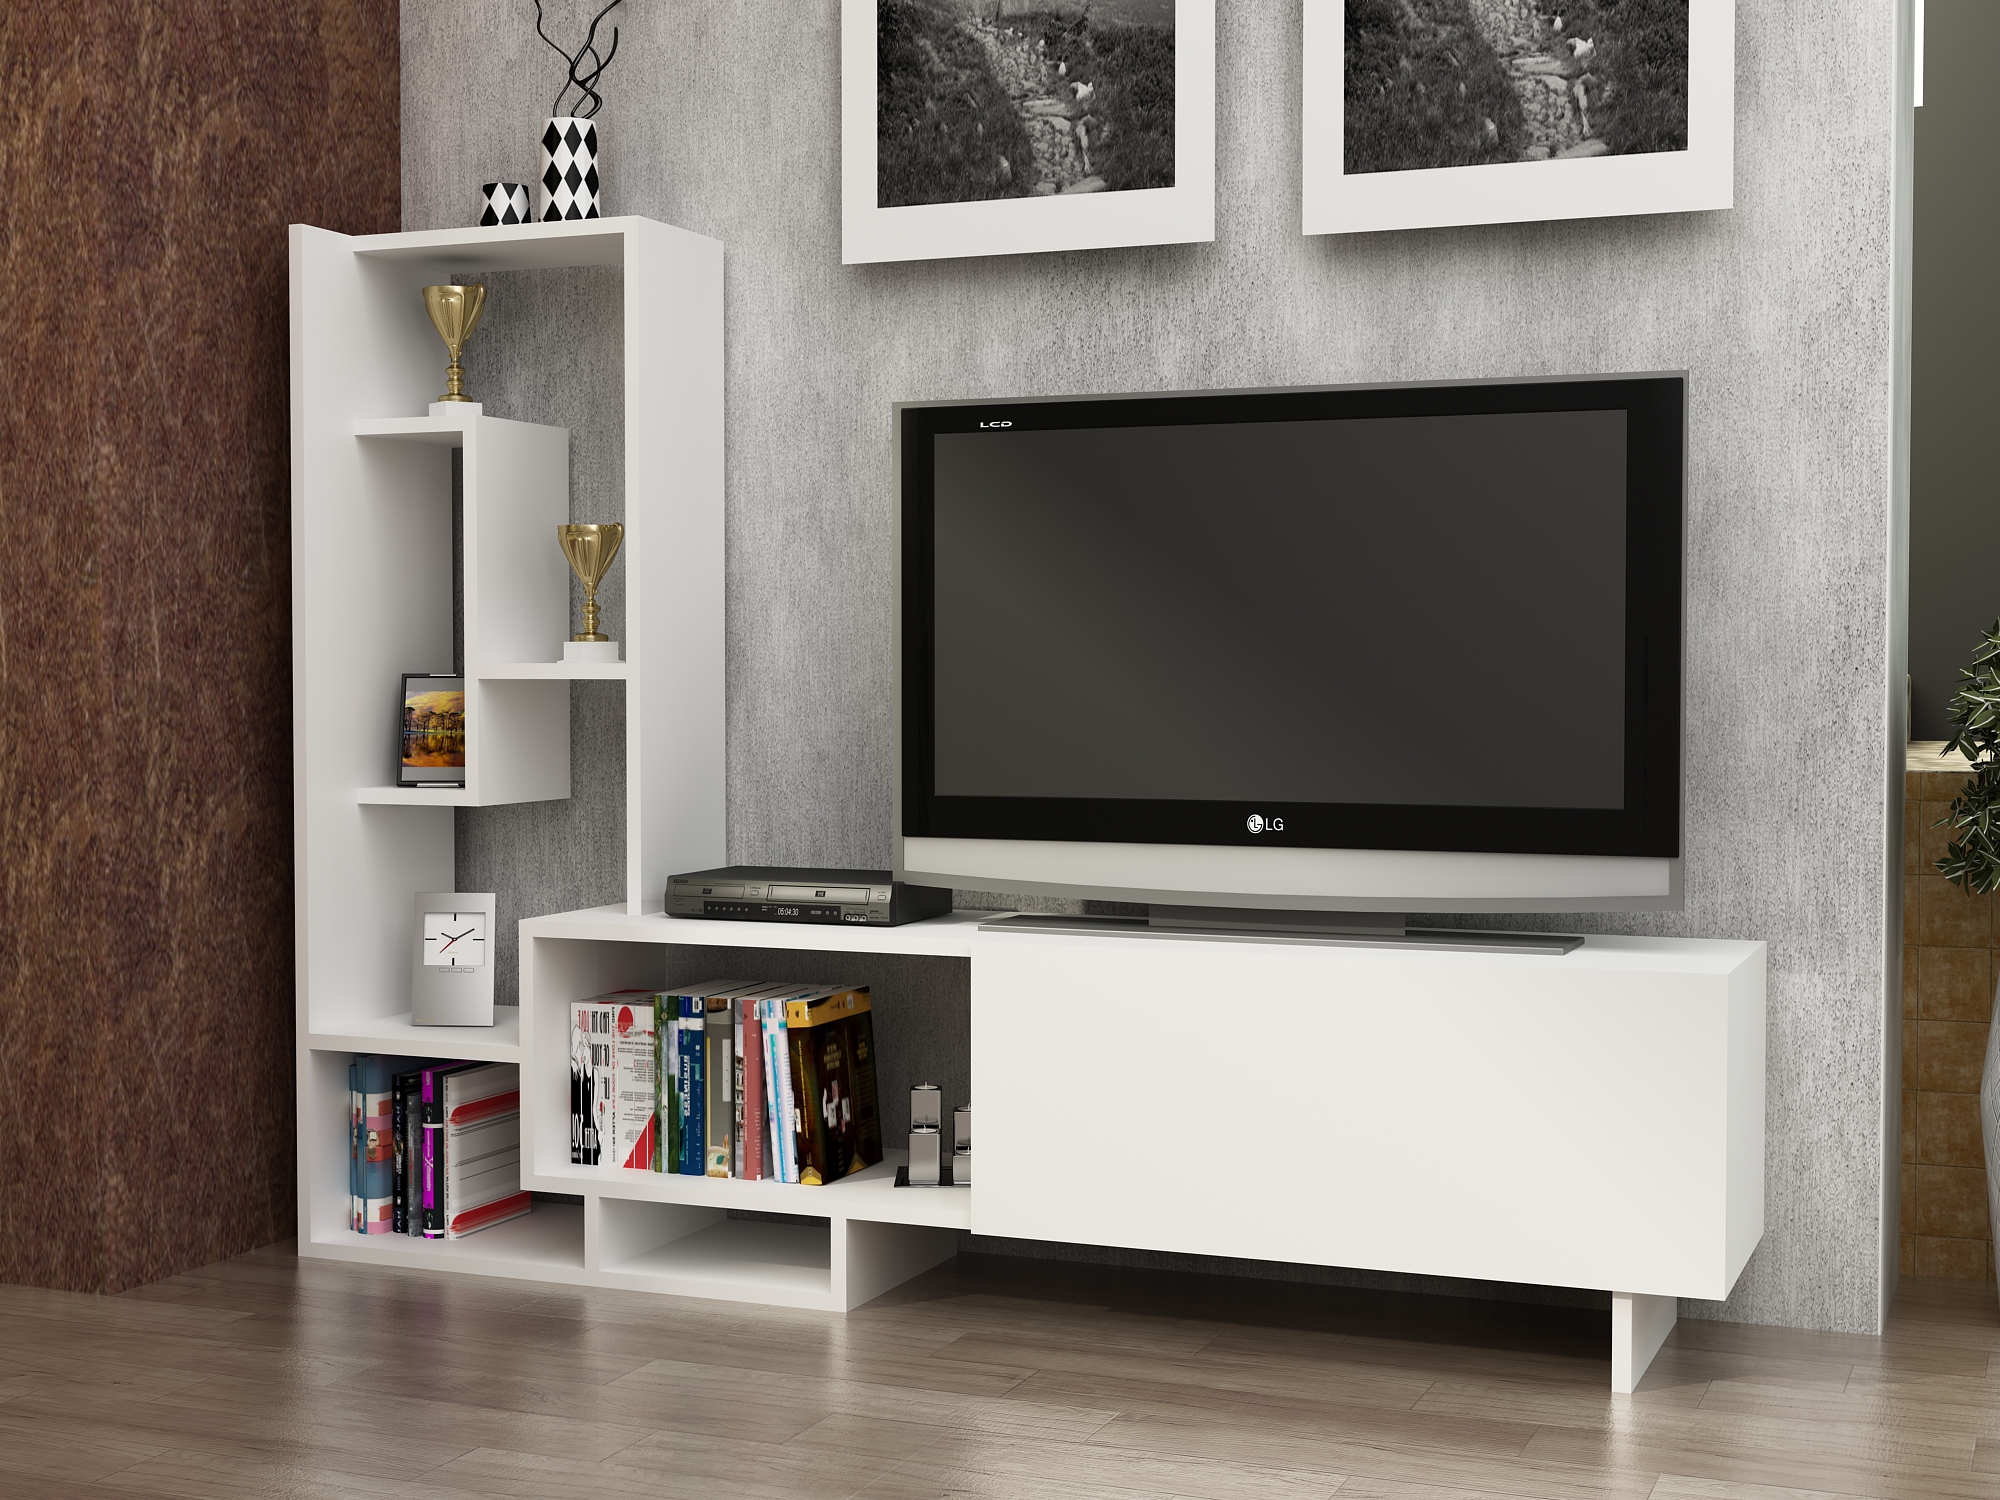 Decorotika Pegai 62" Wide Modern TV Stand & Entertainment Center for TVs up to 55" with Cabinet and Side Shelf - White